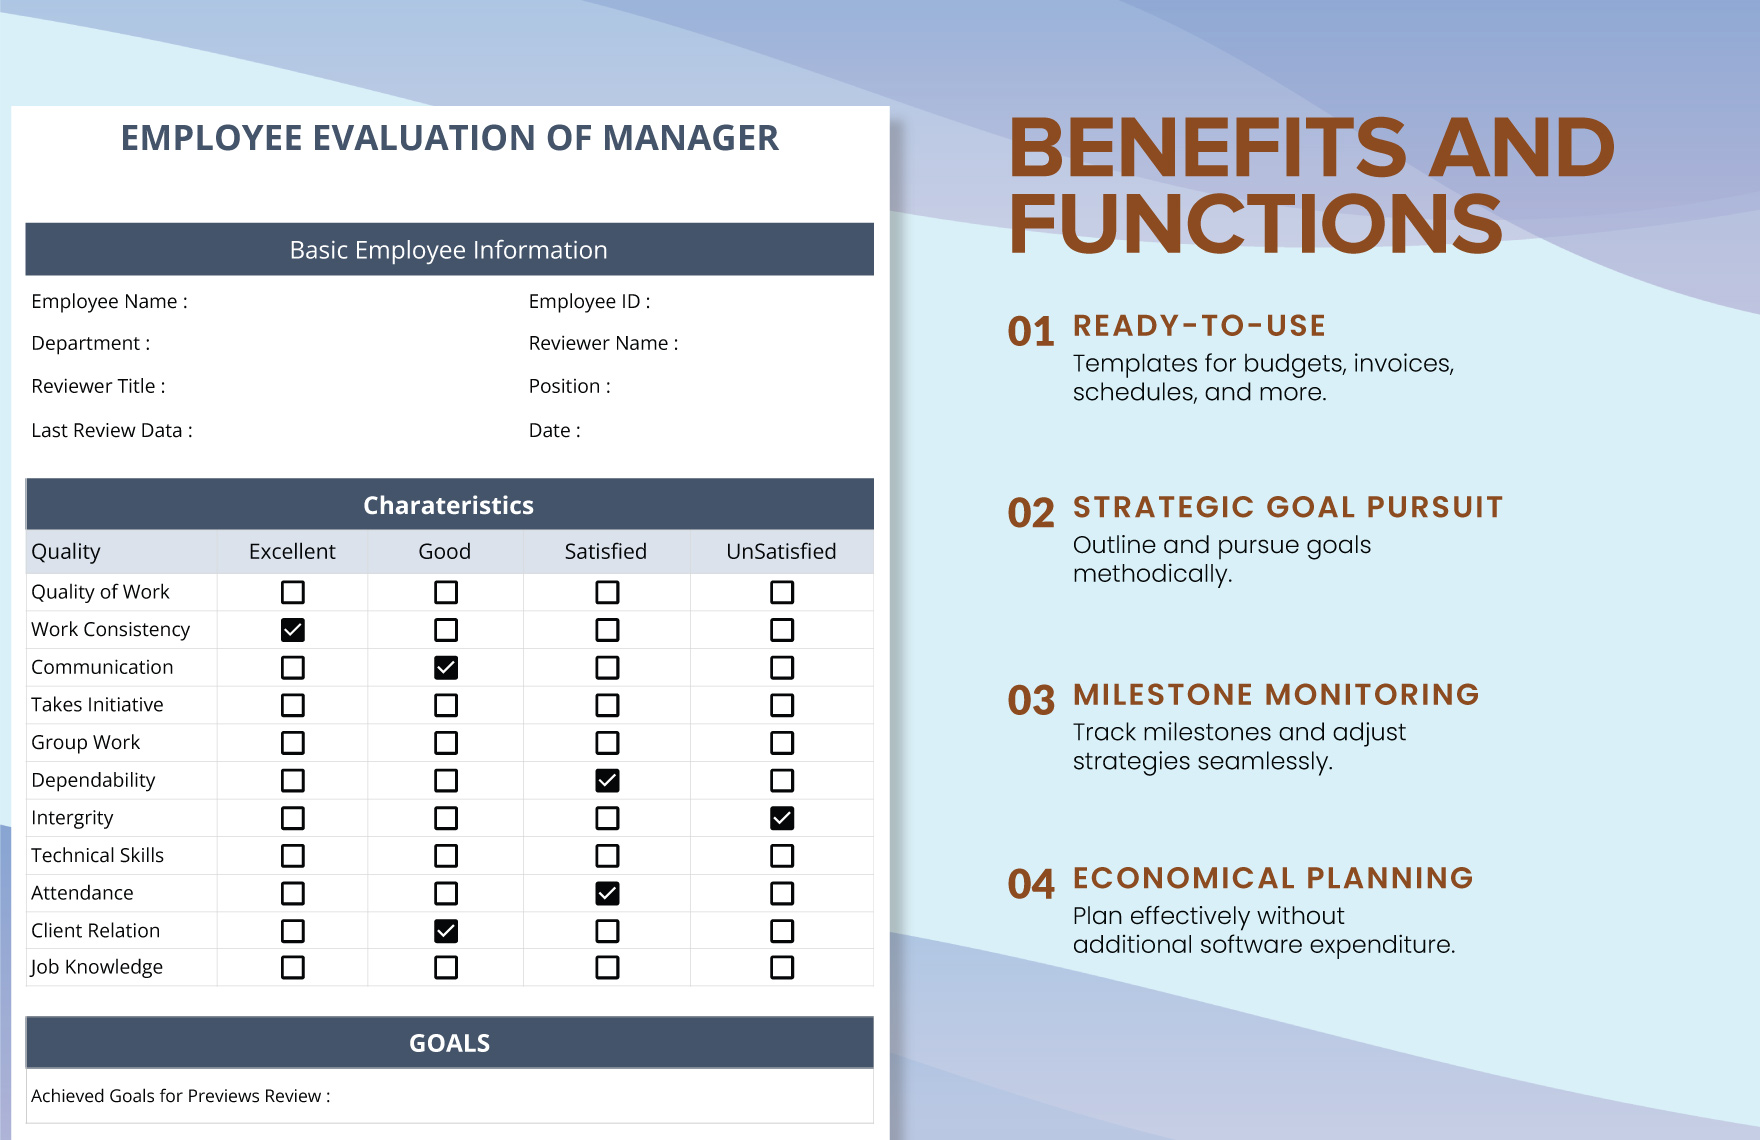 Employee Evaluation of Manager Template